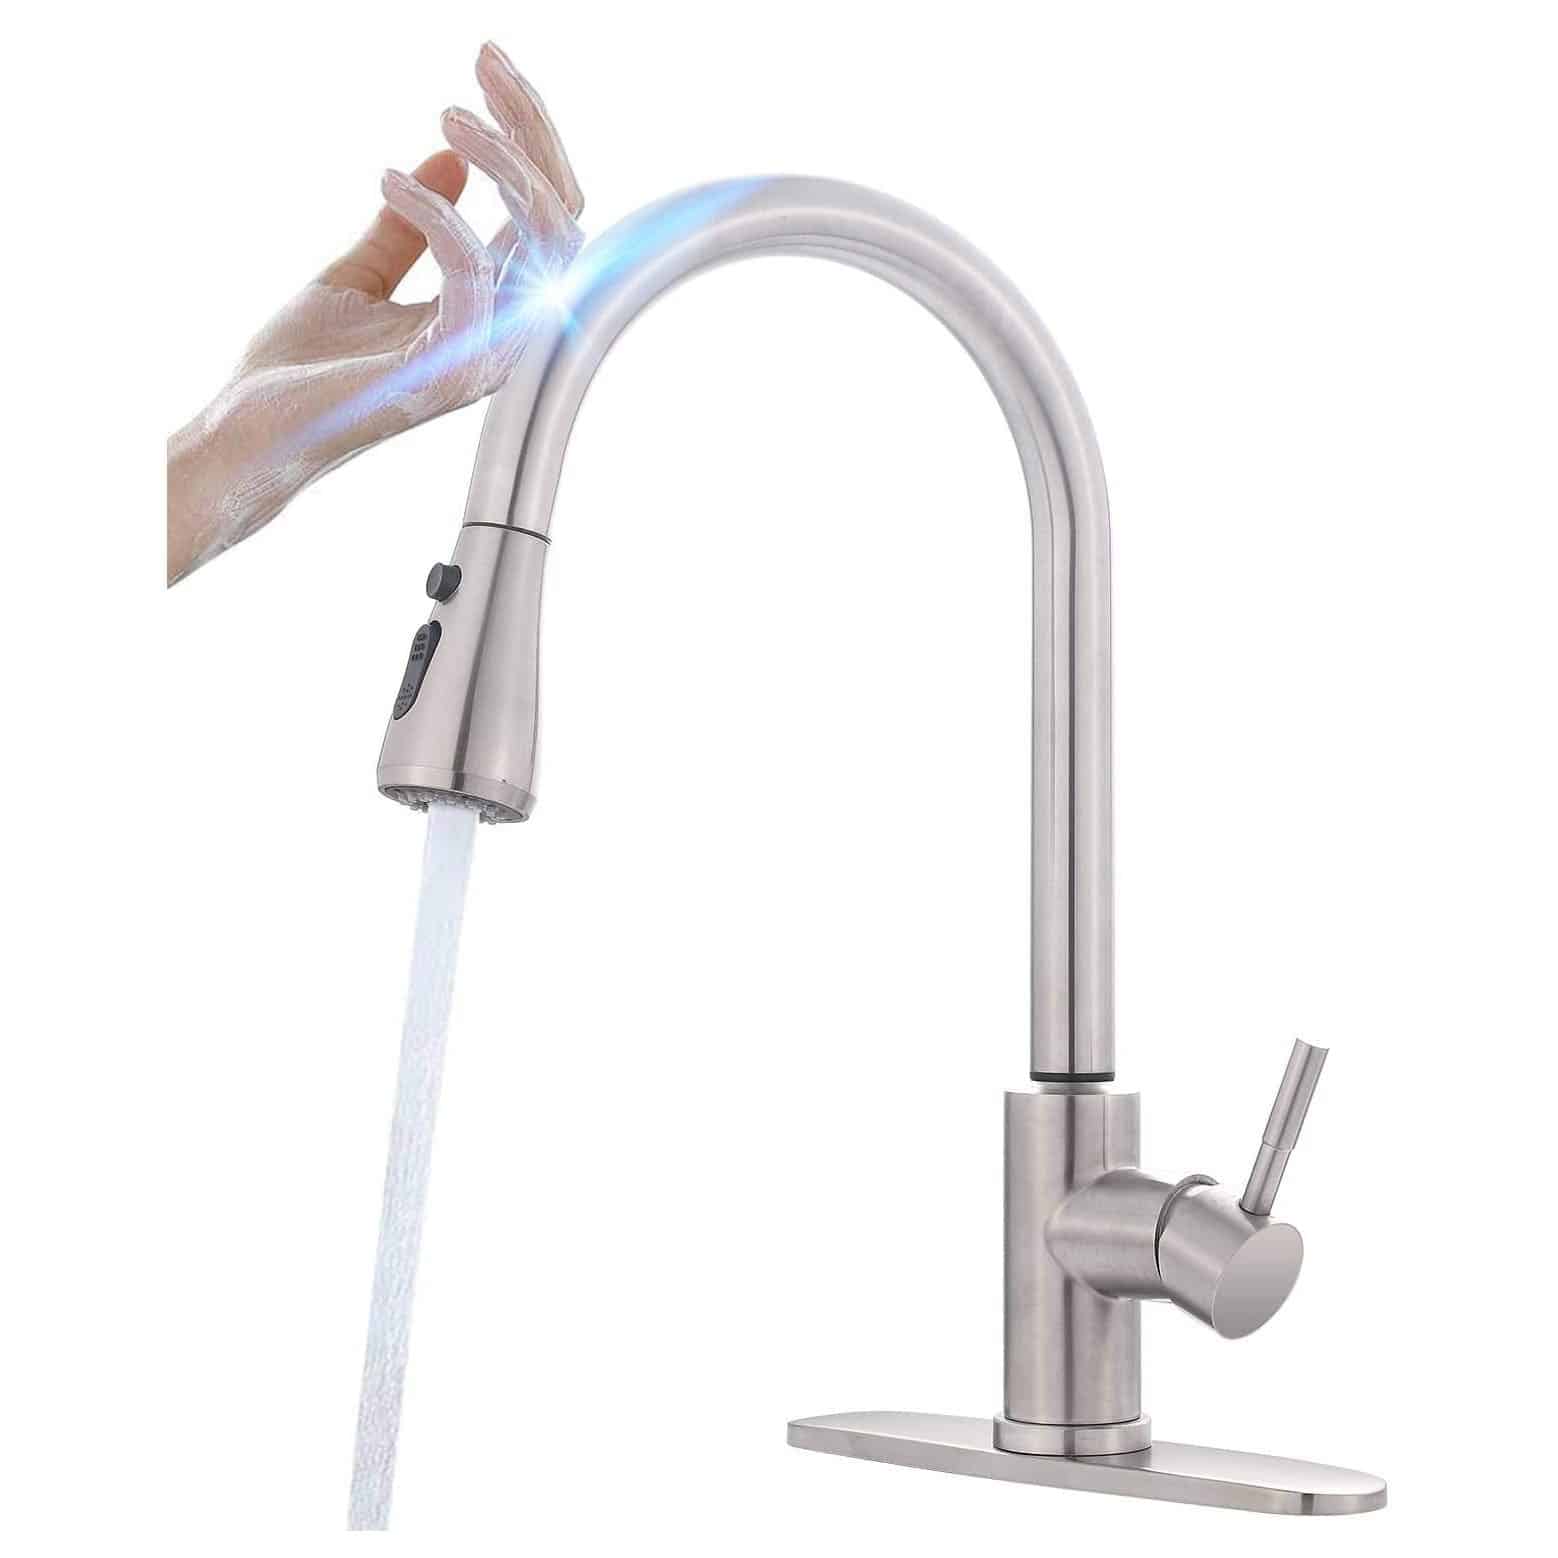 Best Touch Kitchen Faucets in 2022 Reviews | Buyer's Guide